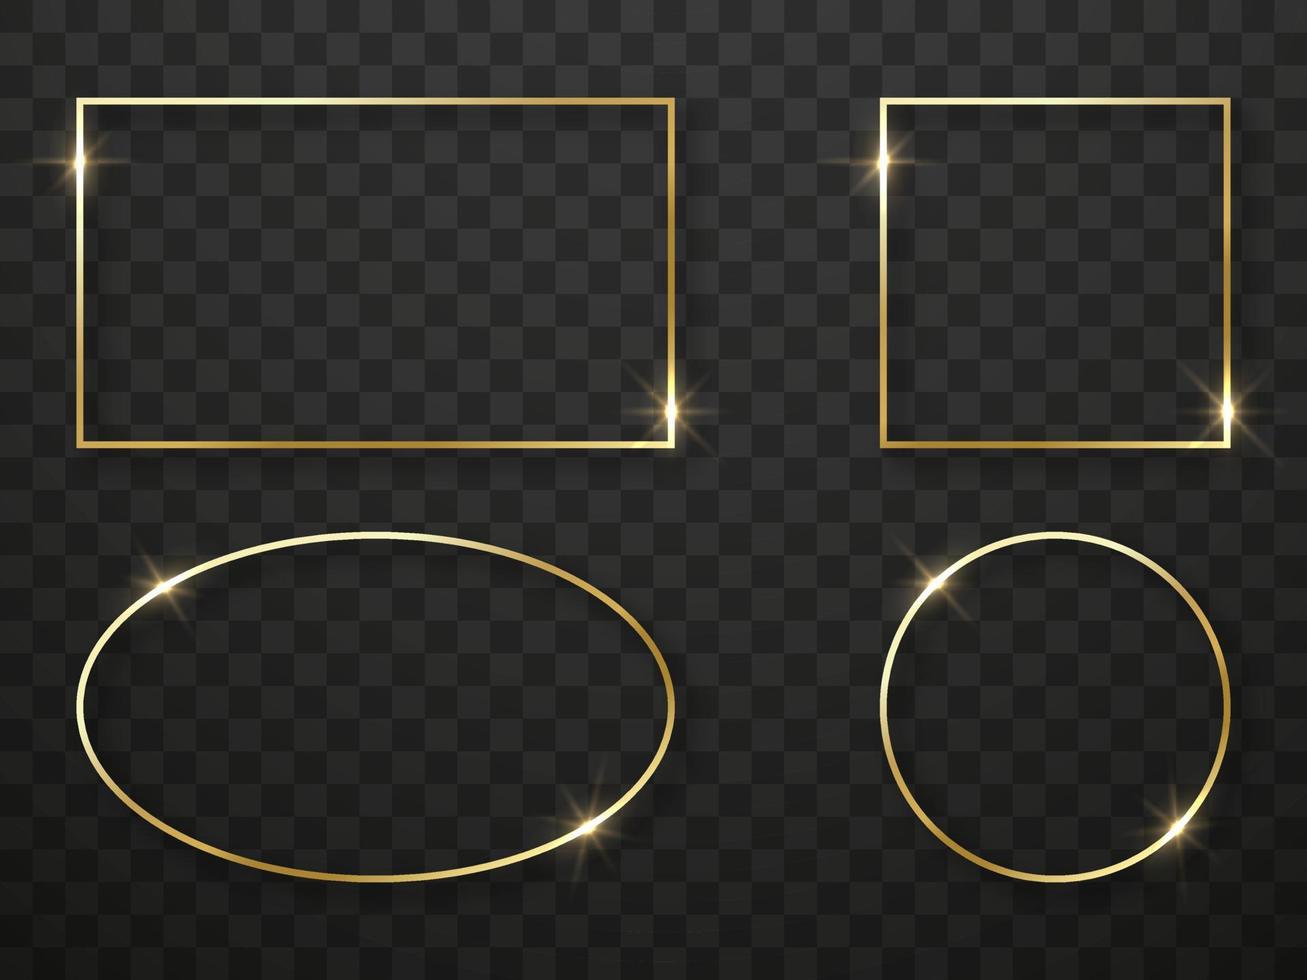 Set of Golden Light Frame with Shiny Effect on Black Transparent Background. Collection of Realistic Gold Border. Template of Glow Square, Rectangle, Circle, Oval Frames. Isolated Vector Illustration.